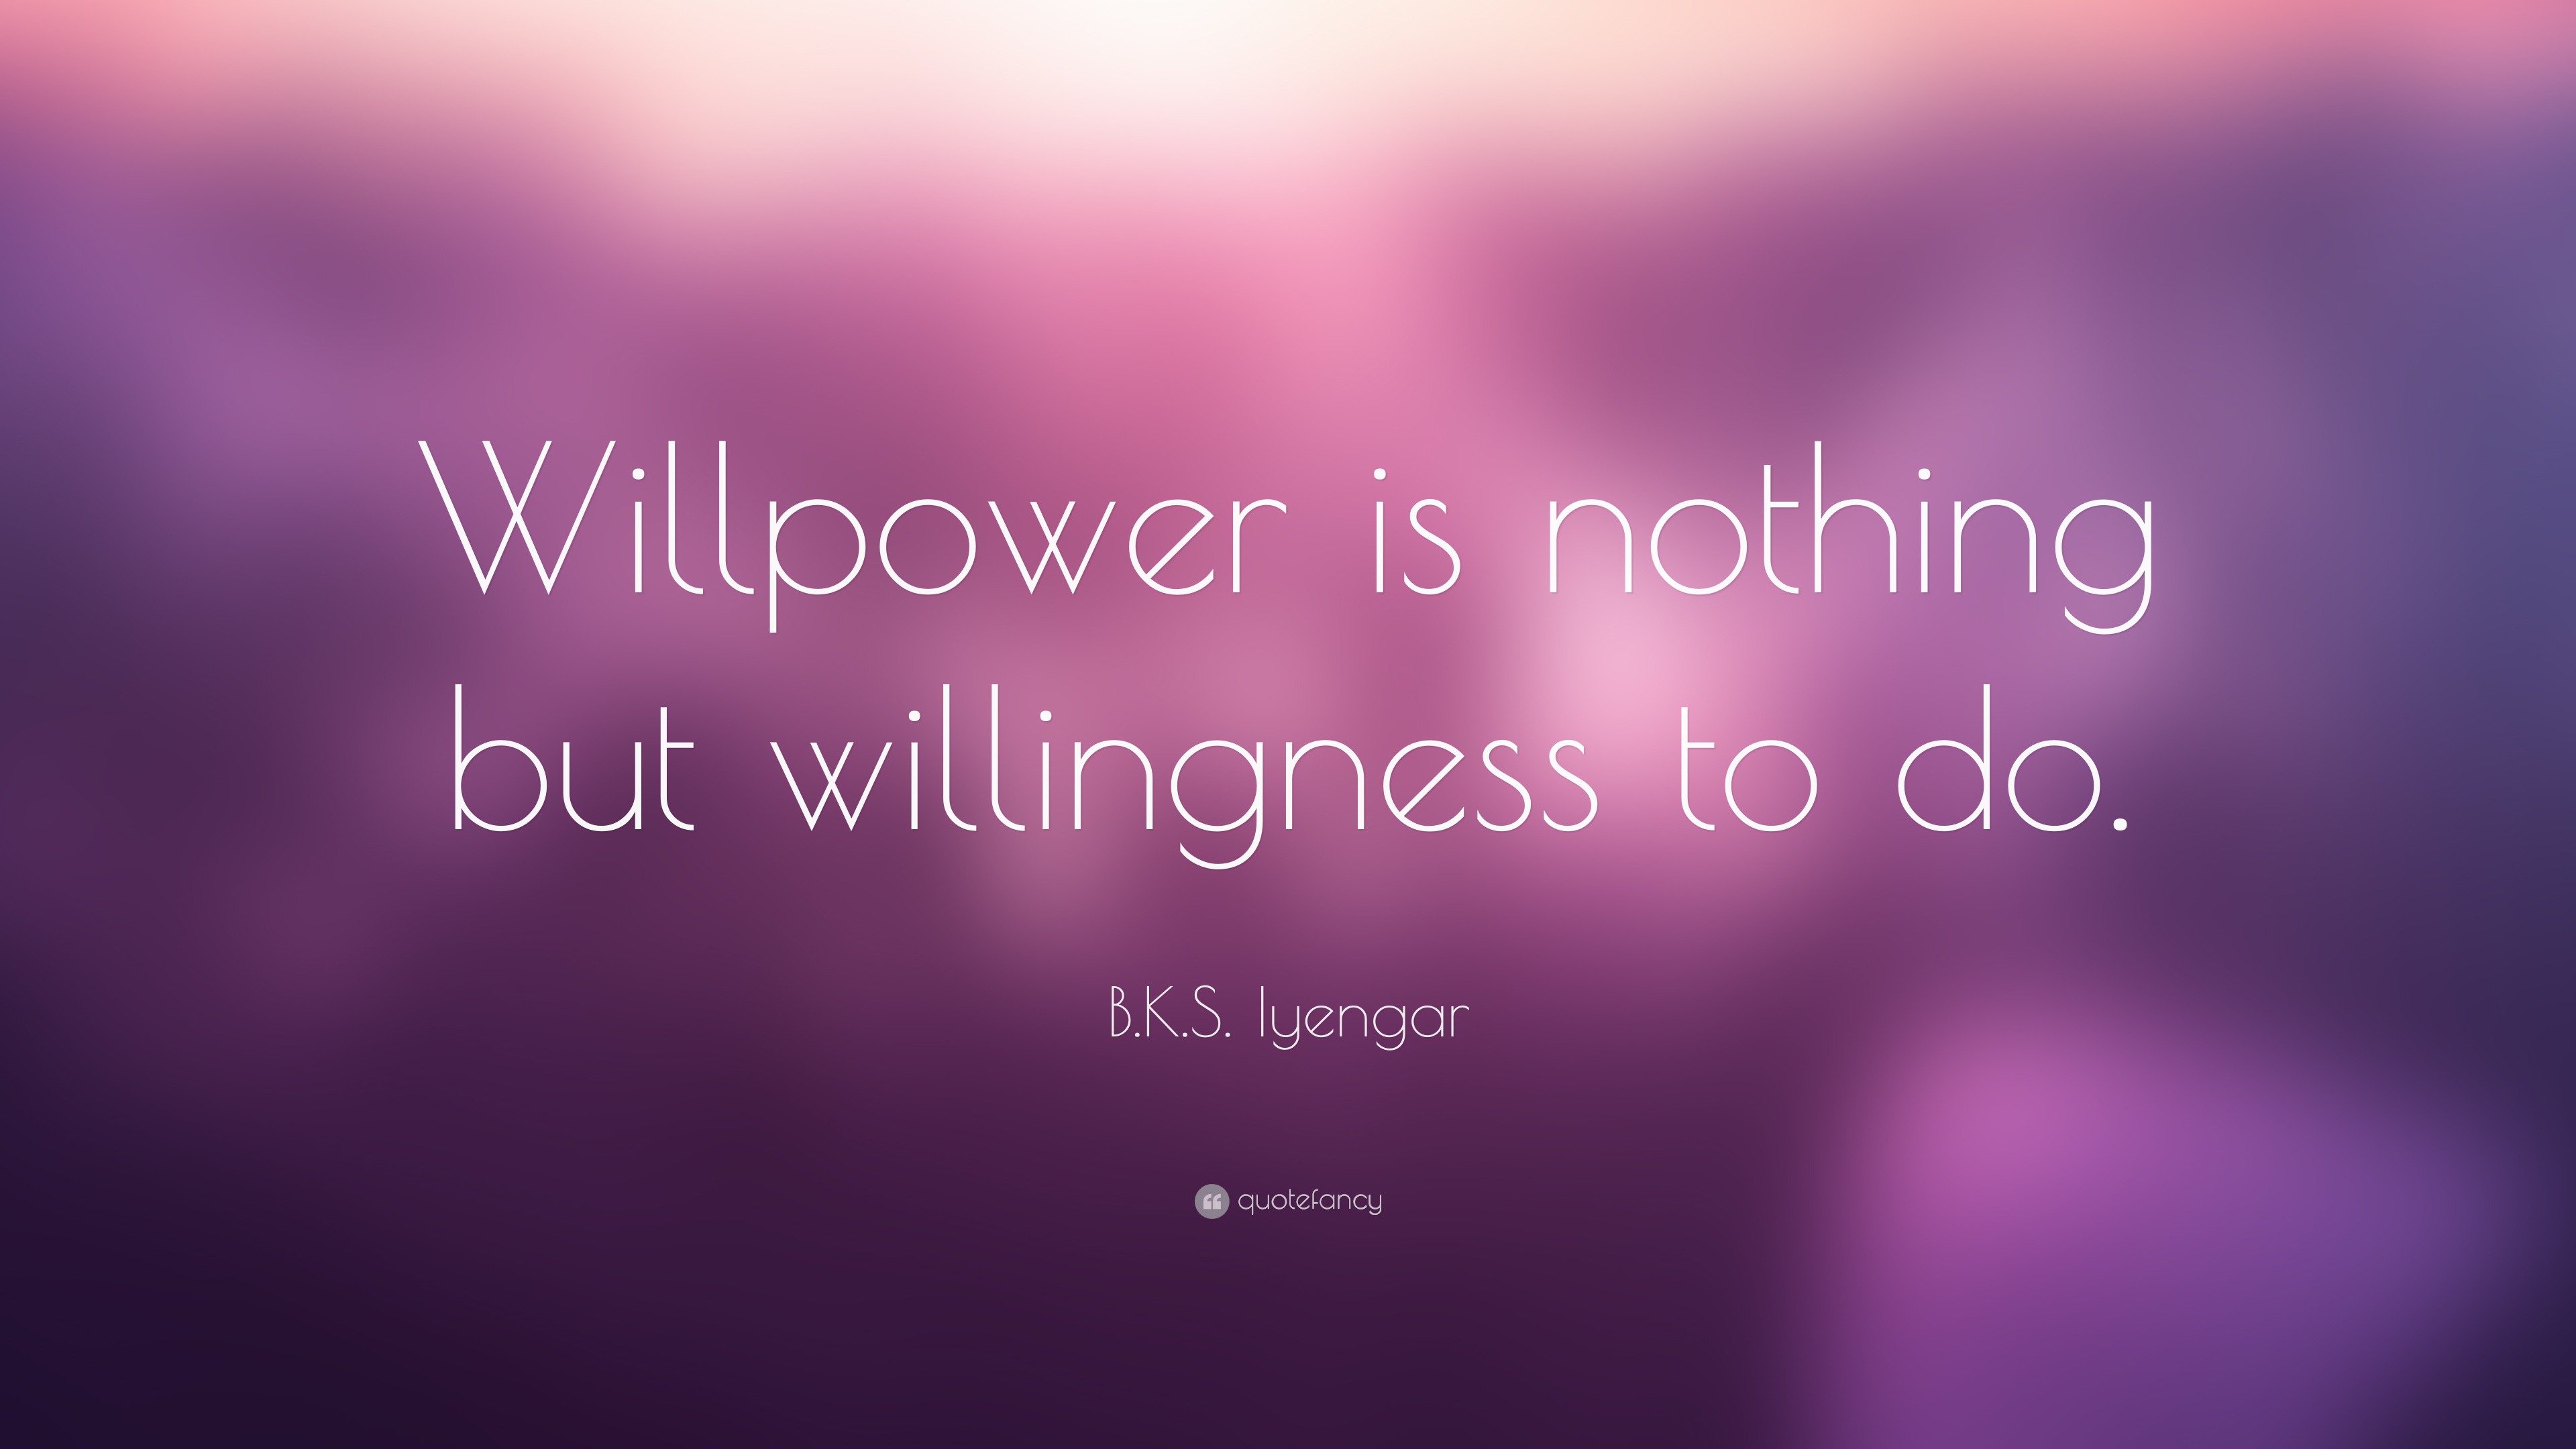 B.K.S. Iyengar Quote: “Willpower is nothing but willingness to do.”